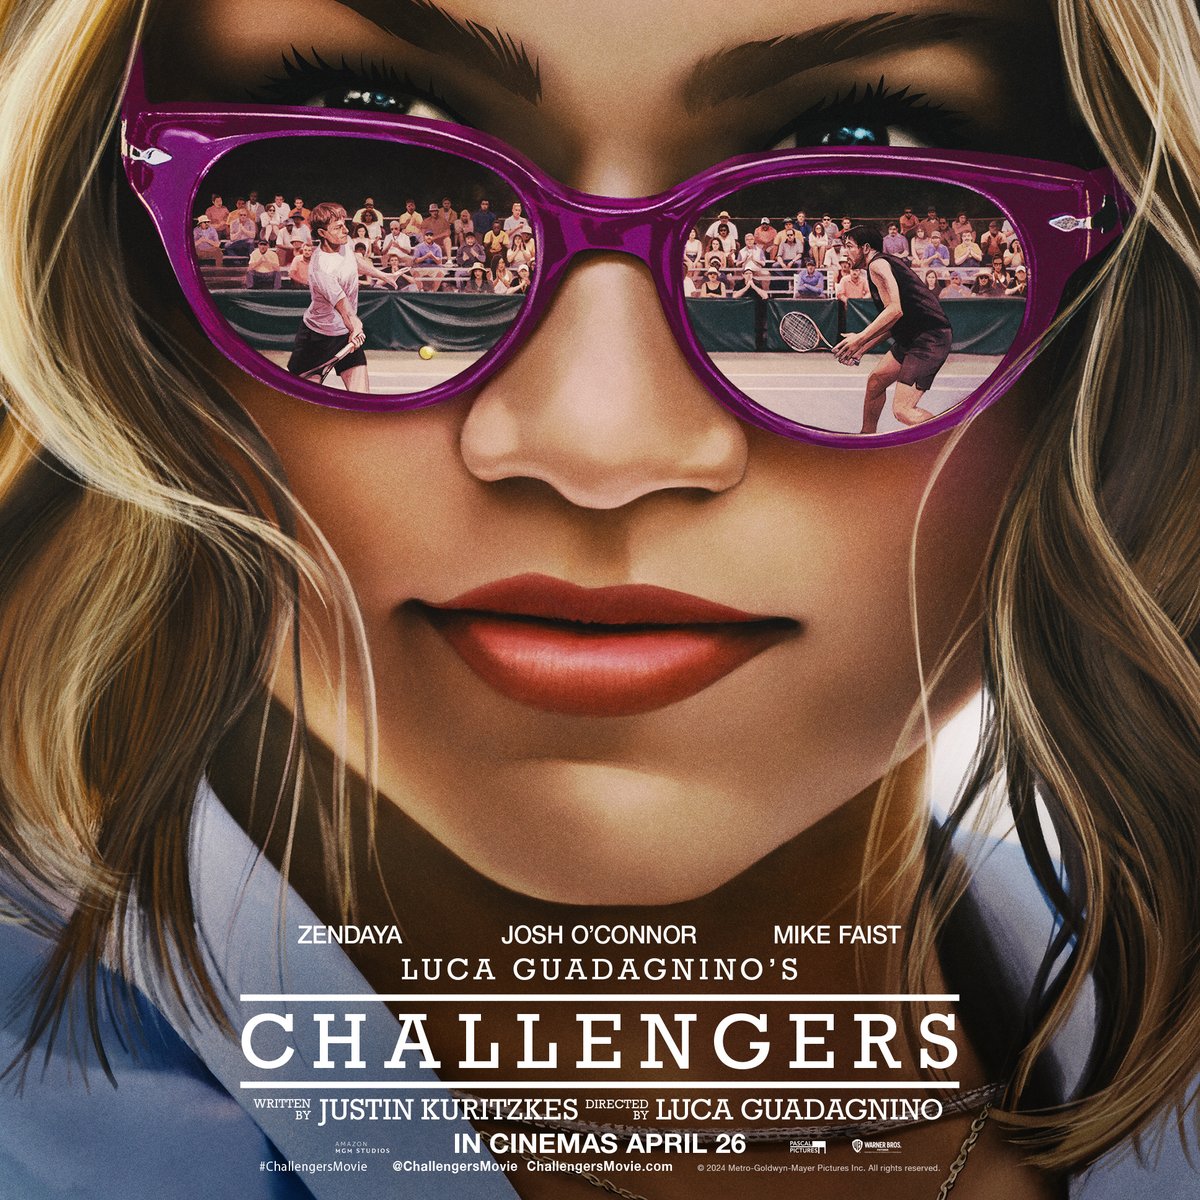 🎾 Get on Sharap-over to the Duke's and park your Roger Fe-derrière in one of our cinema seats this evening for our final shows of #Challengers before it heads over to @dukesatkomedia from tomorrow! ✨ Aged 16-25? Tickets just £4.99!